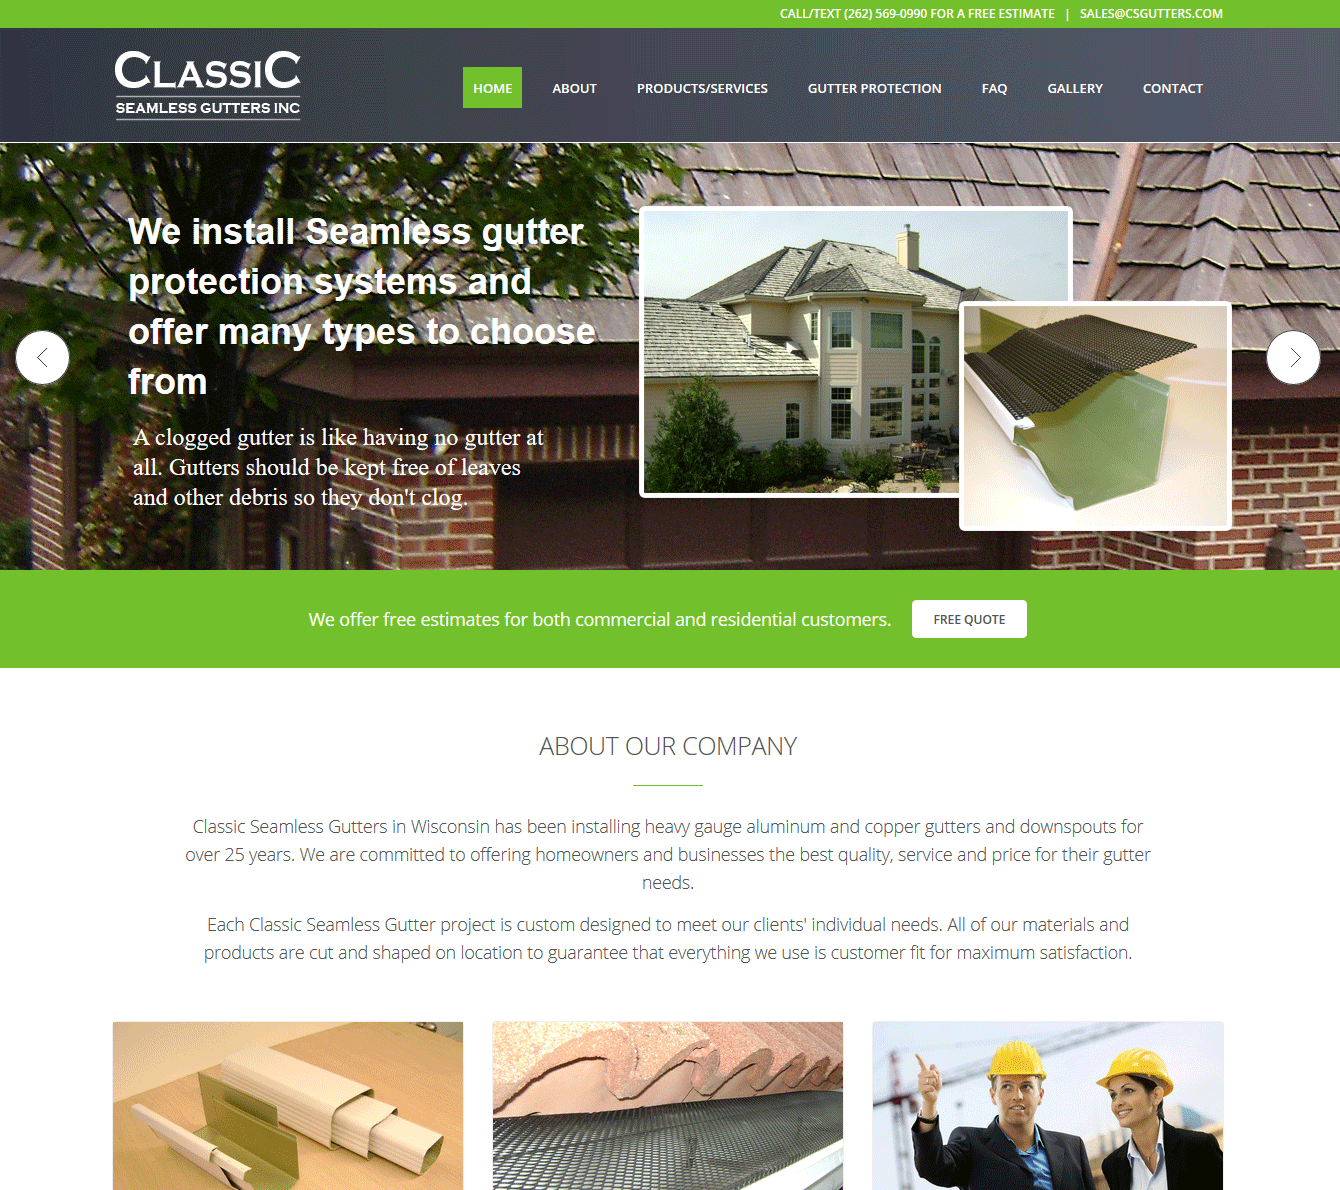 Classic Seamless Gutters